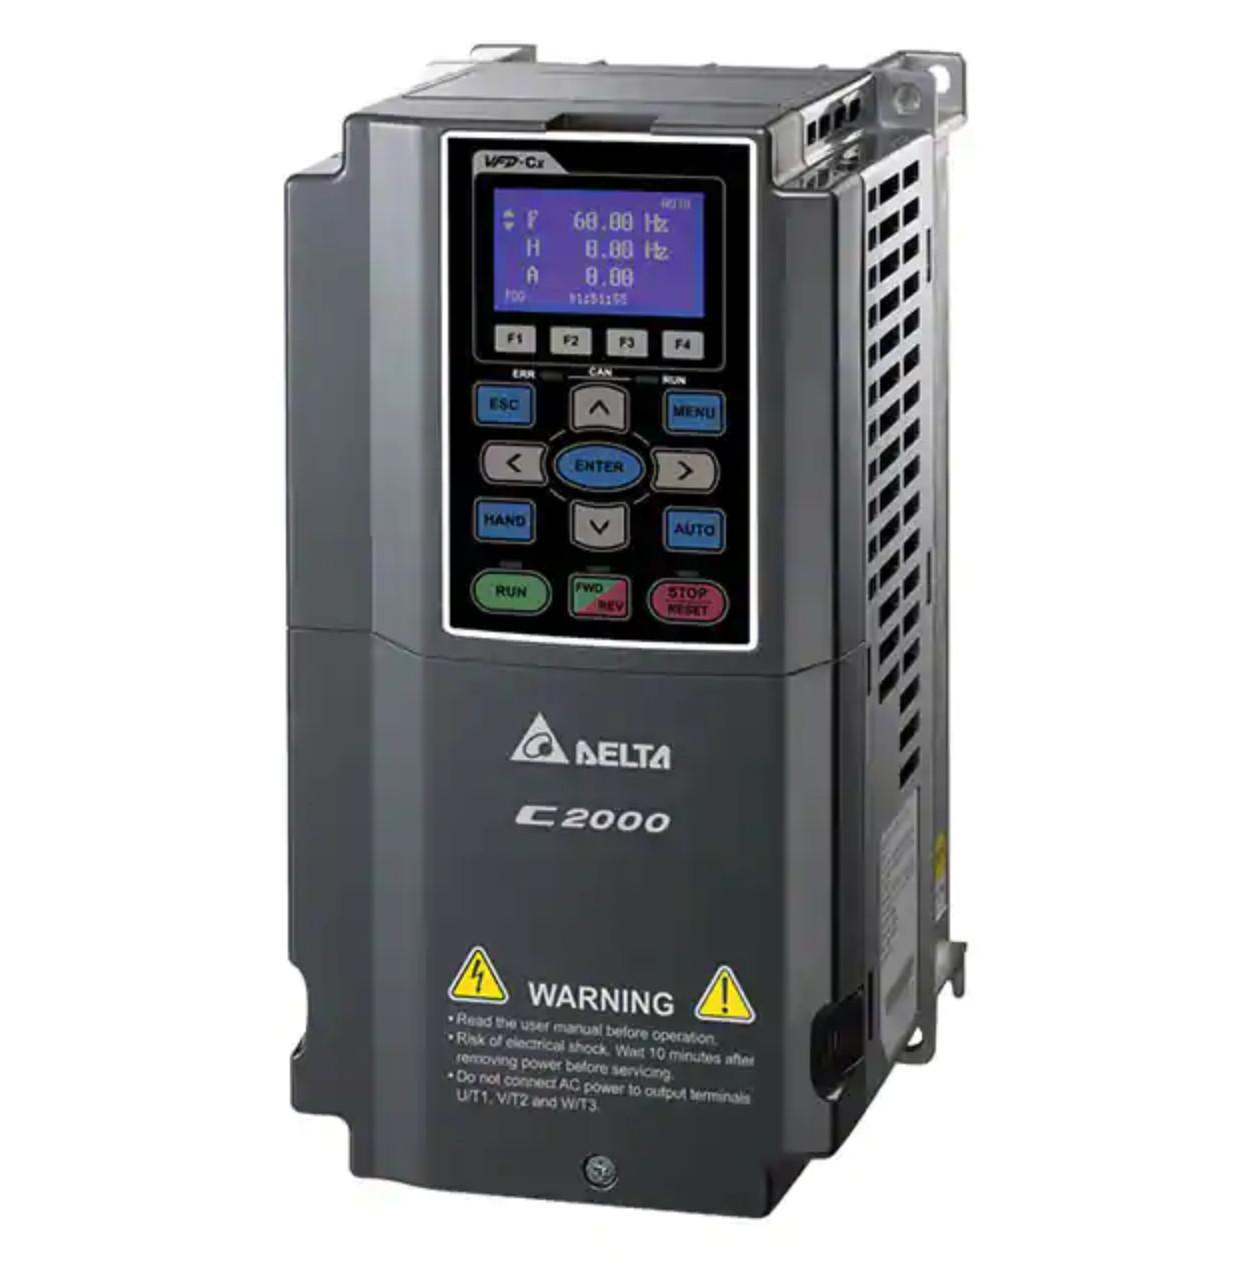 Delta VFD55C43A-21 Variable Frequency Drive, 3 phase, 460 VAC Input, 7.5 HP, frame A, wall mount, IP20, NEMA 1